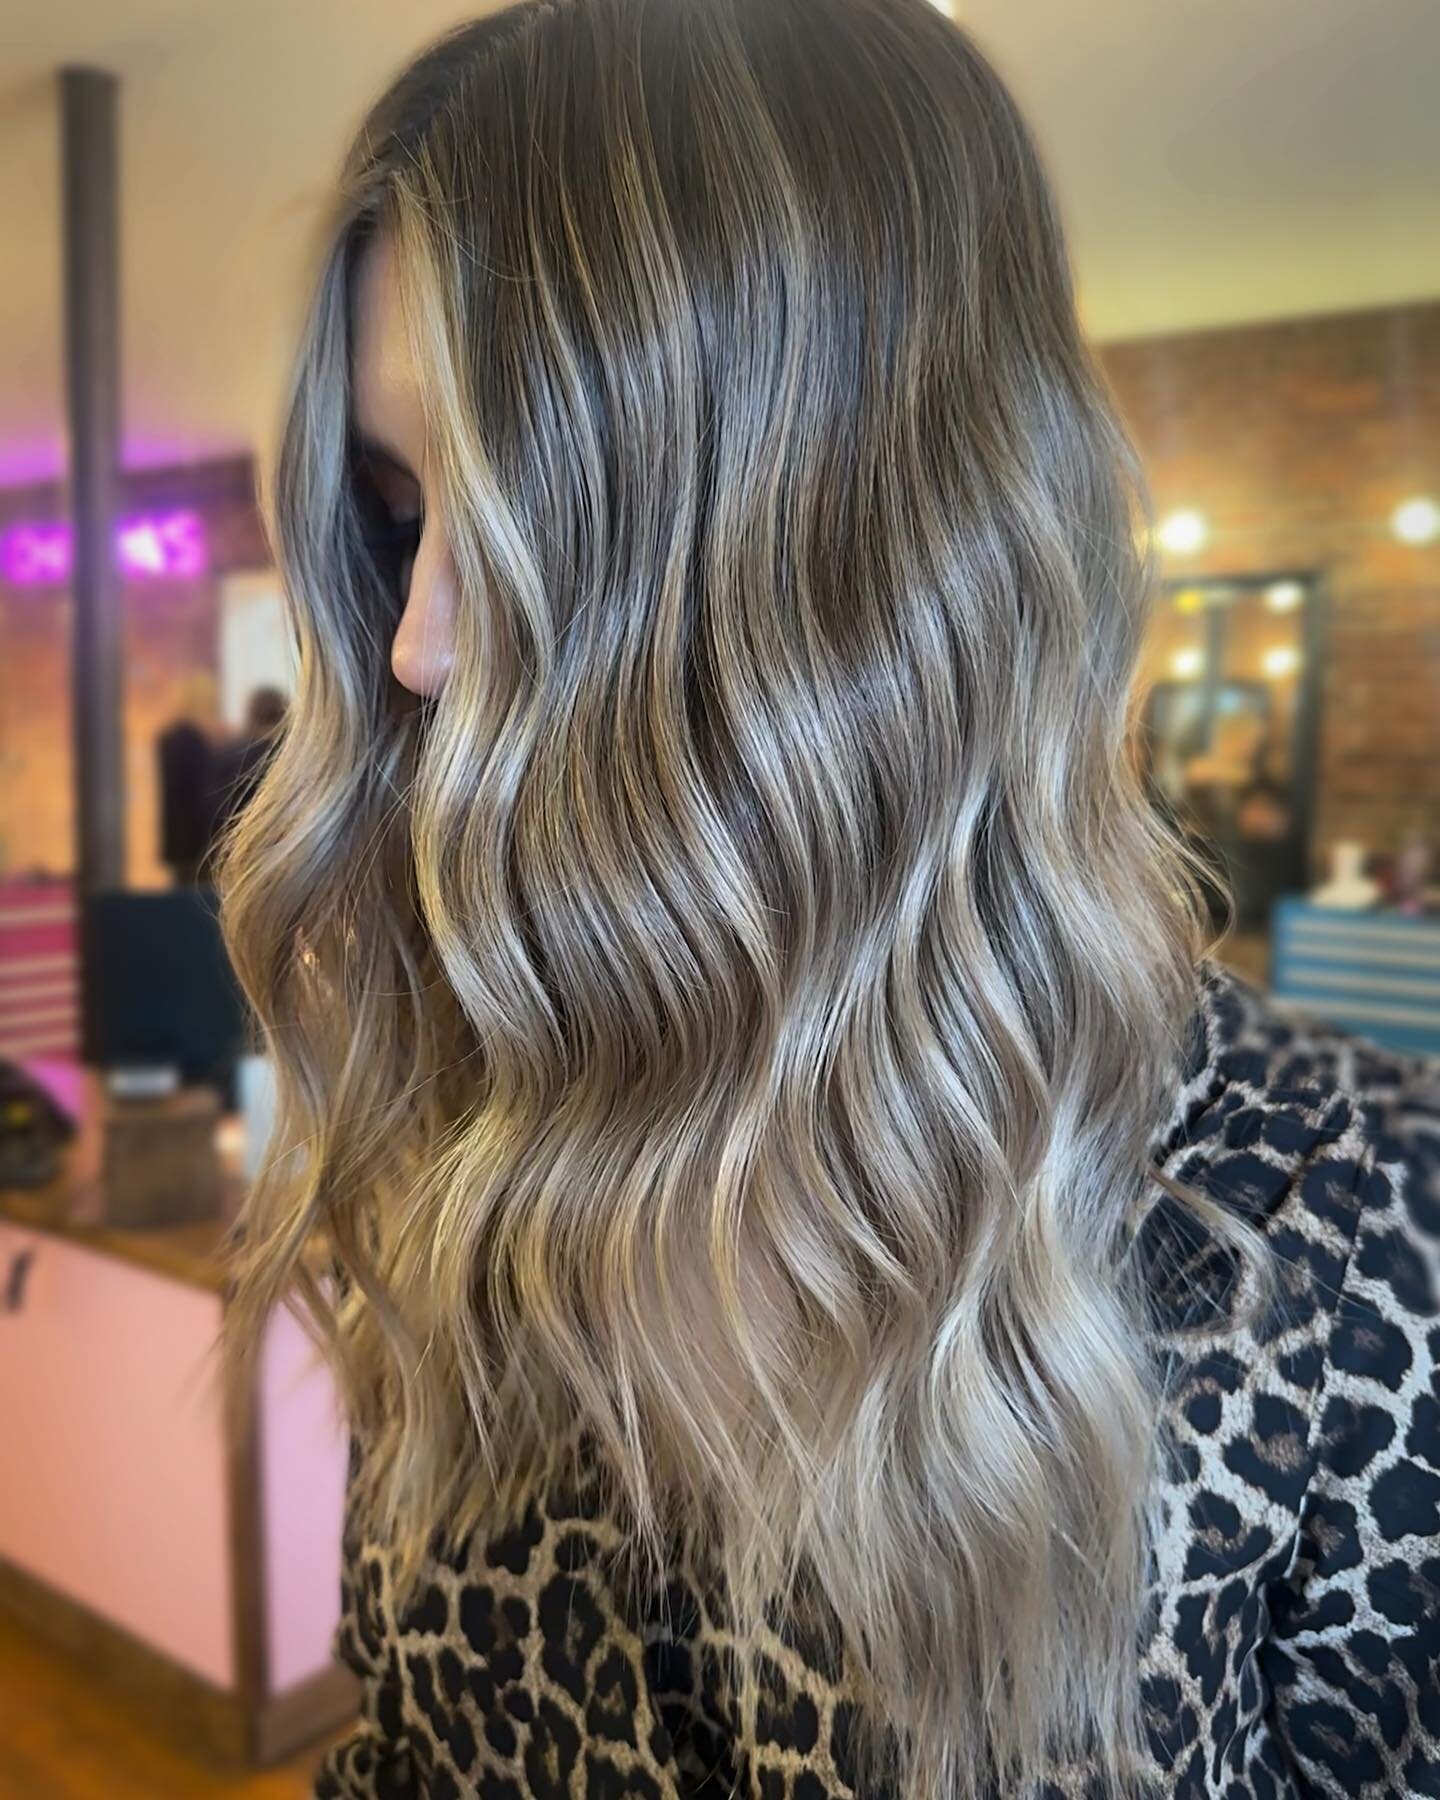 This color is everythinggg. 🤩

#chachasalon #lex #lexky #lexington #lexingtonky #lexingtonhairstylist #lexingtonhair #ky #kyhairstylist #kyhair #universityofkentucky